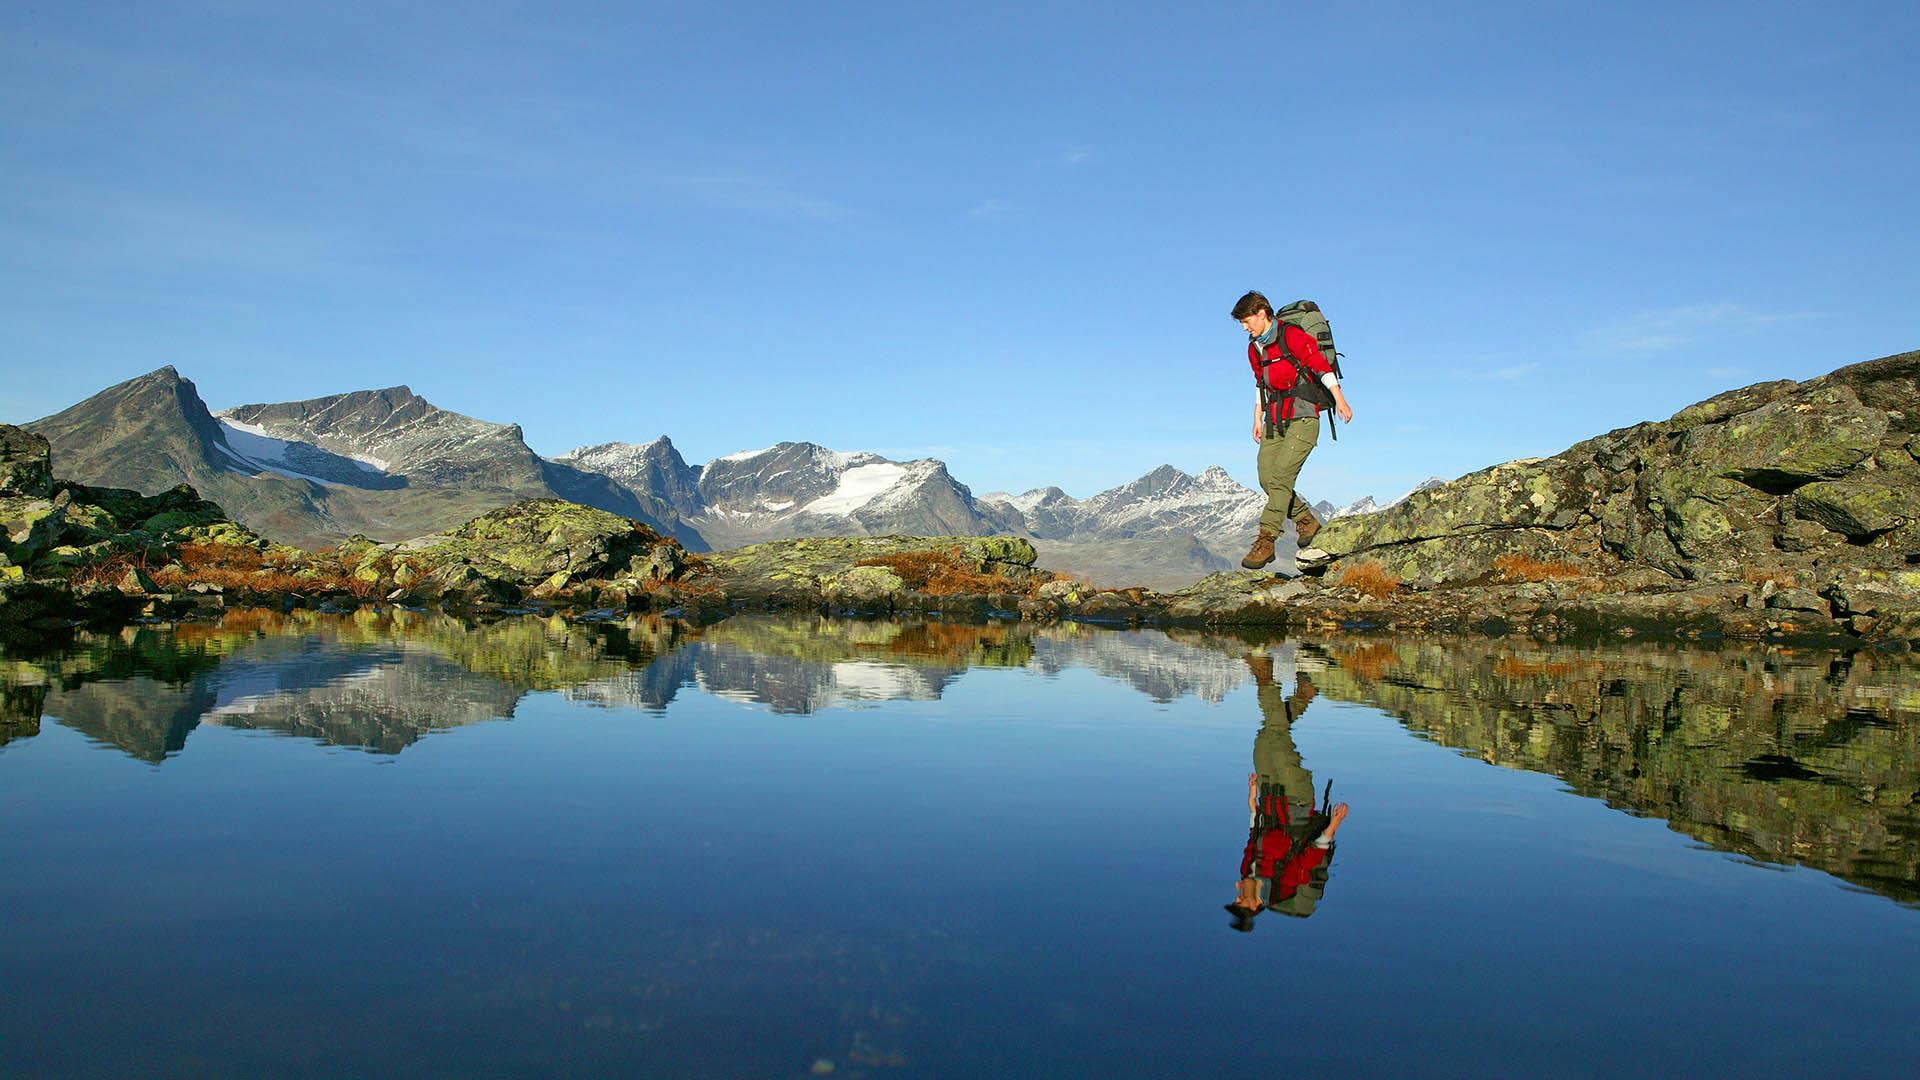 A woman and her reflection as she walks over rocks behind a small pond with a completely calm water surface. In the background high summits rise.